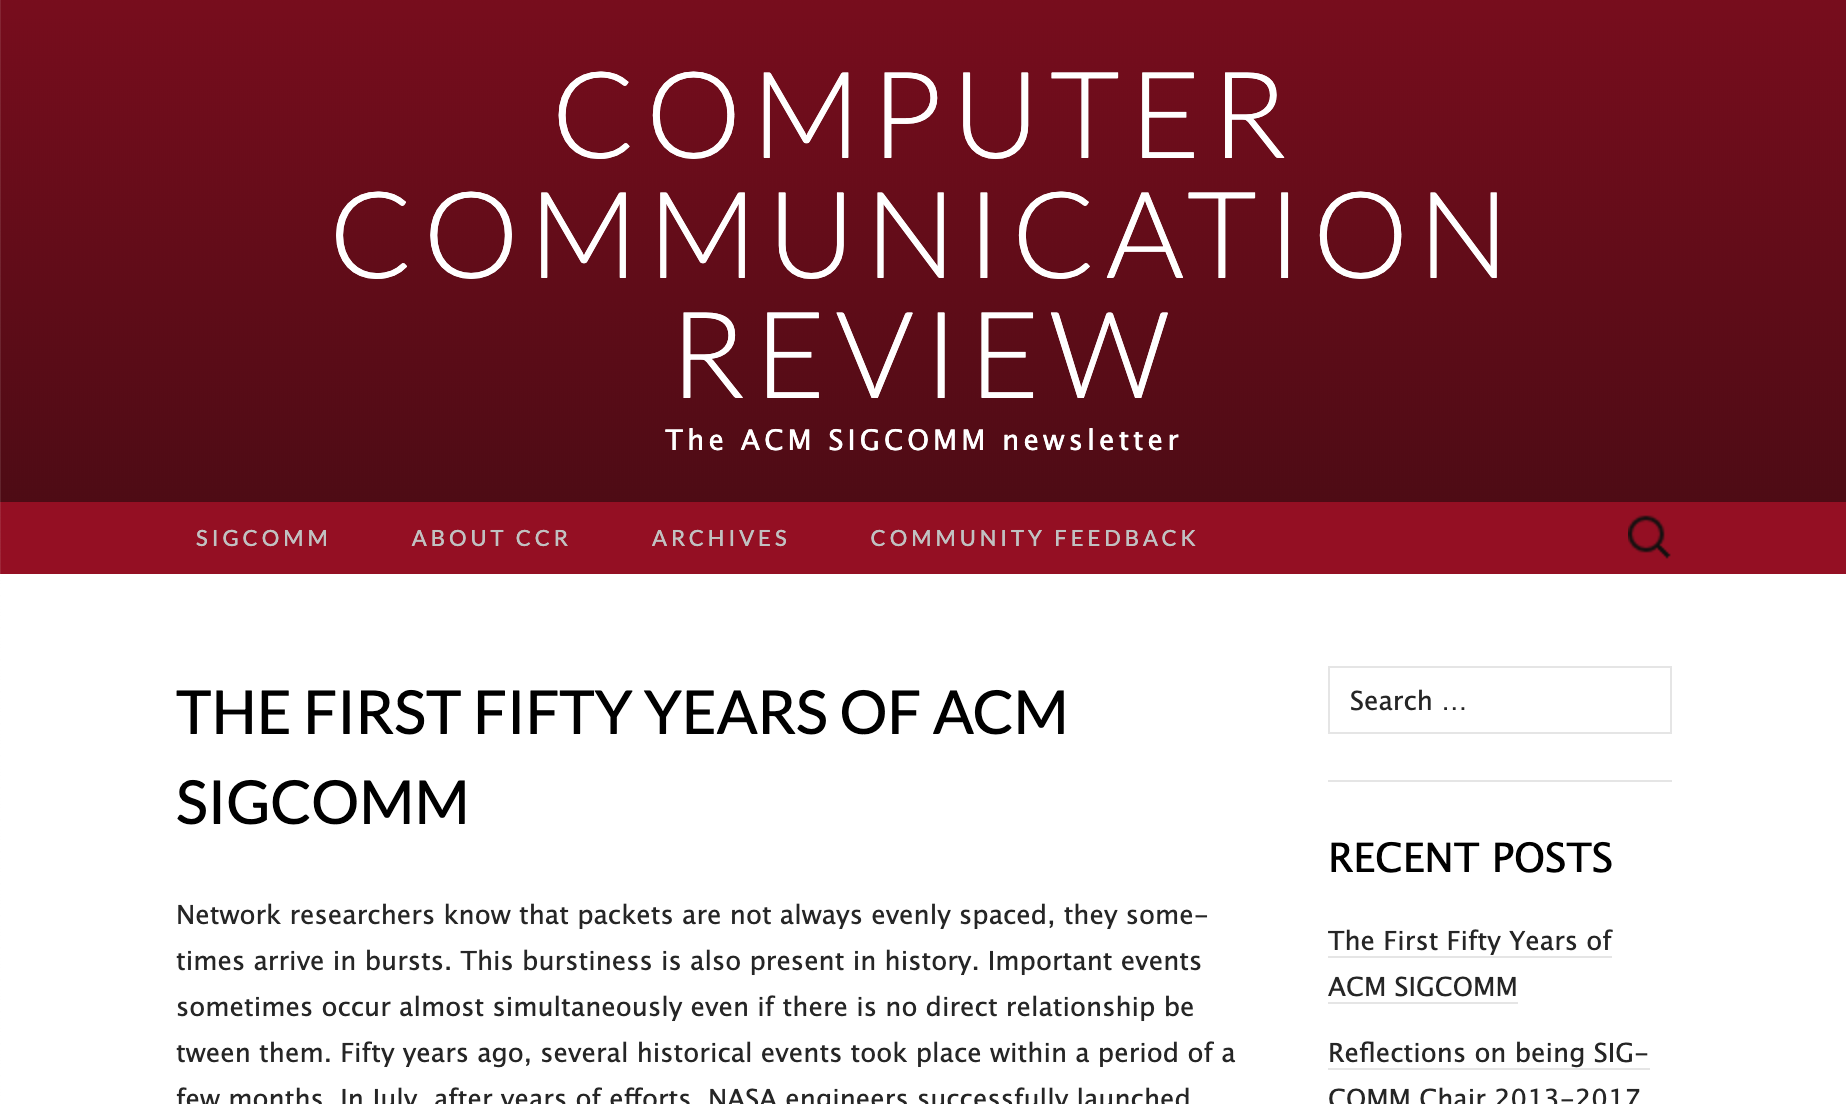 https://ccronline.sigcomm.org/2019/ccr-october-2019/the-first-fifty-years-of-acm-sigcomm/